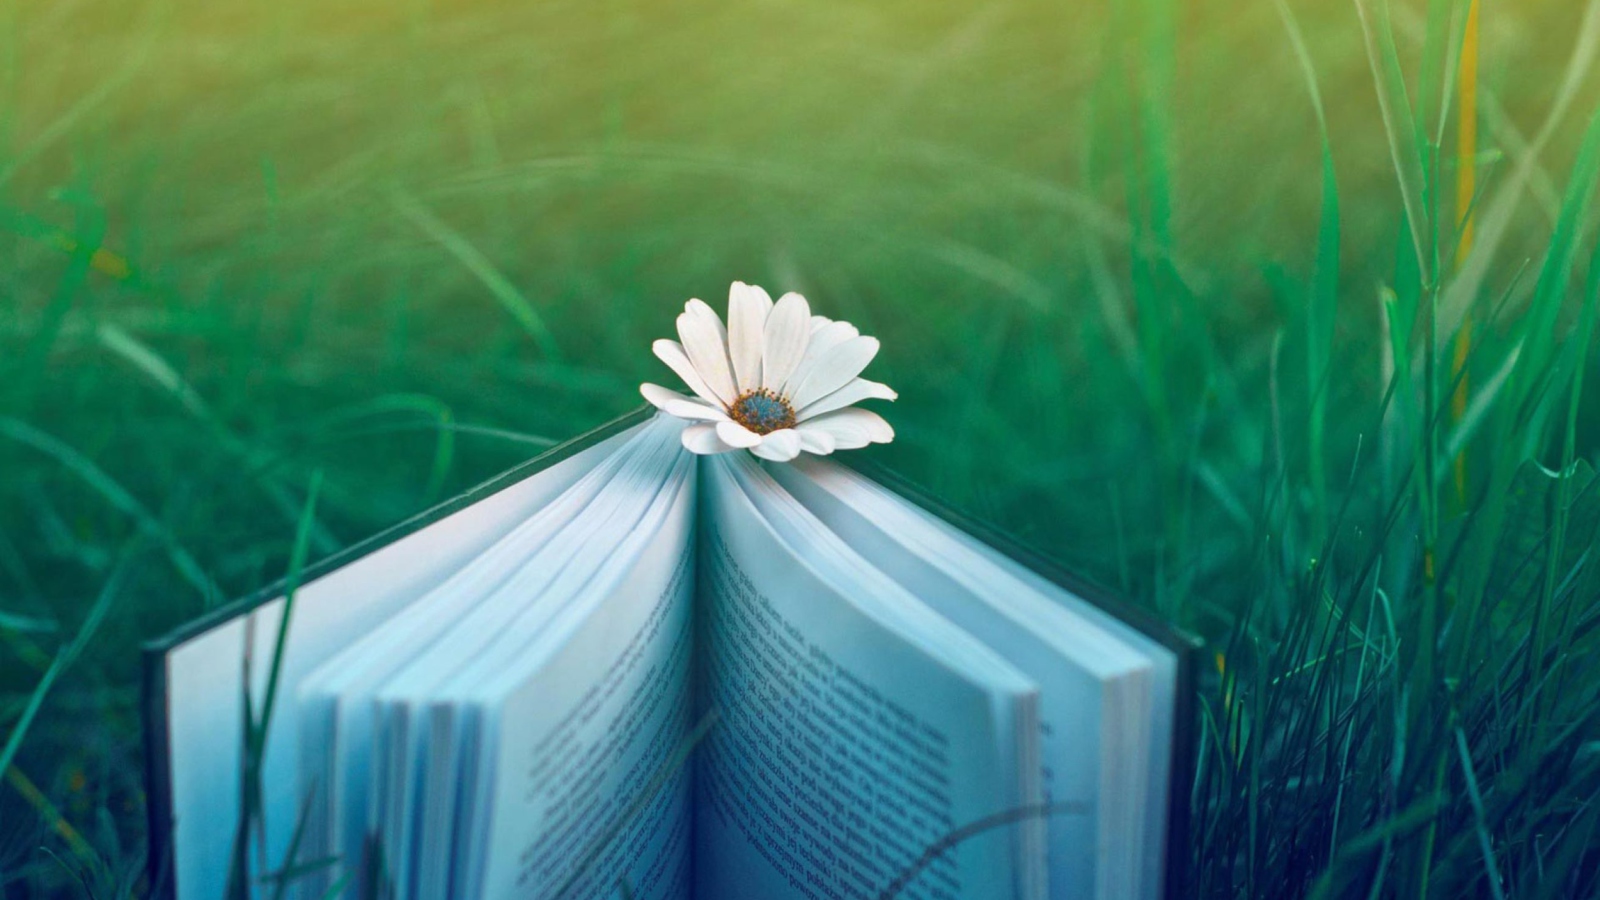 Flower And Book wallpaper 1600x900